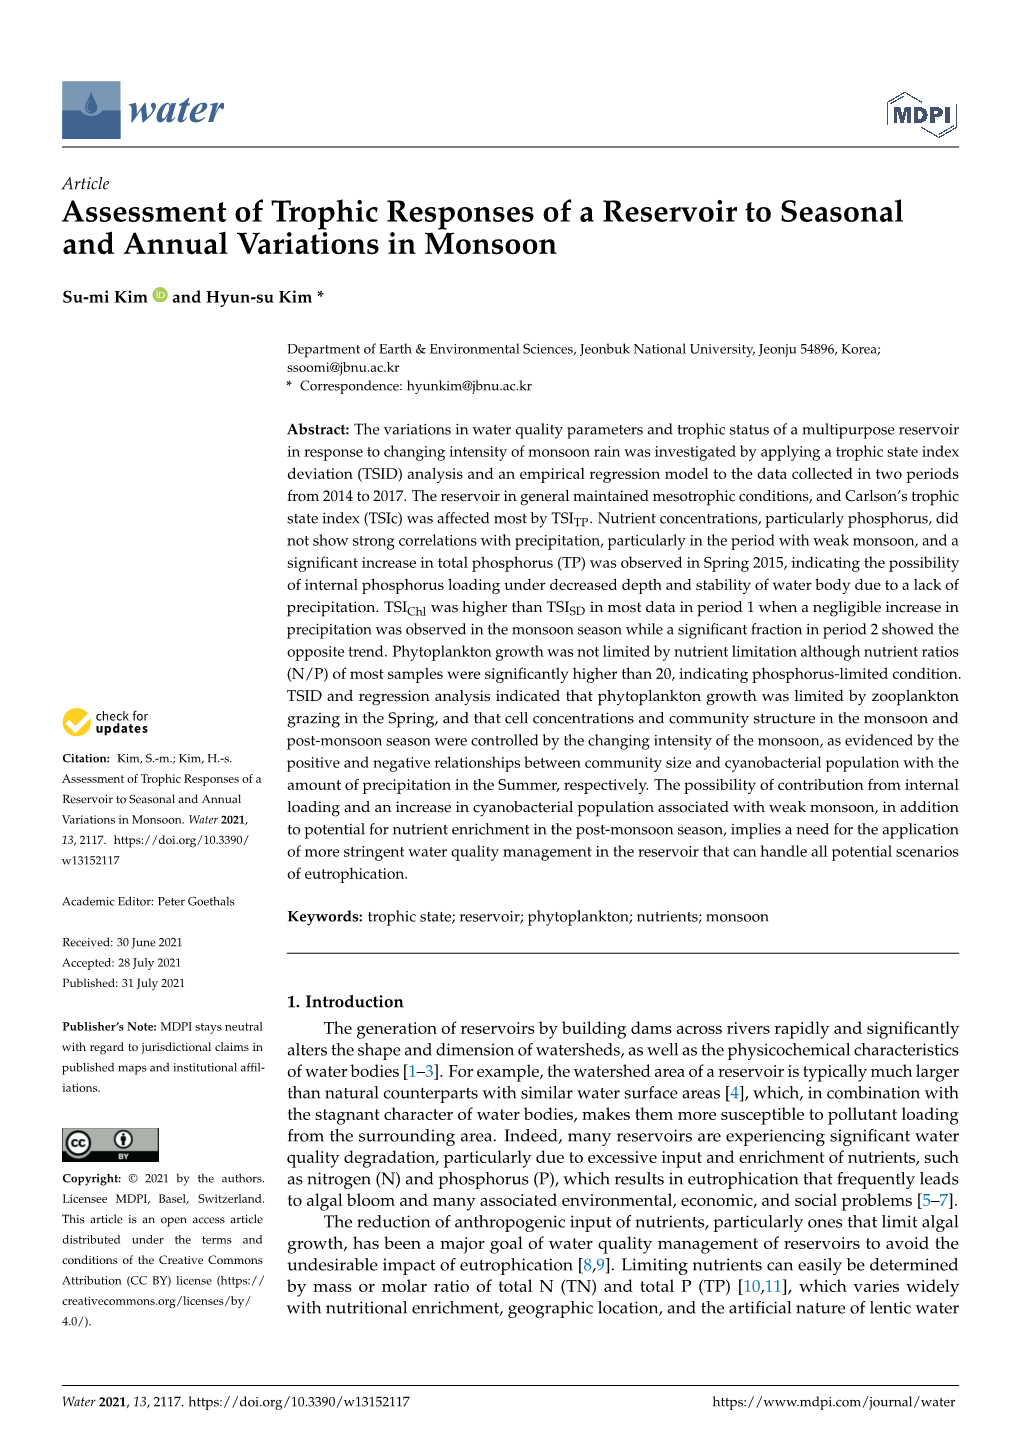 Assessment of Trophic Responses of a Reservoir to Seasonal and Annual Variations in Monsoon